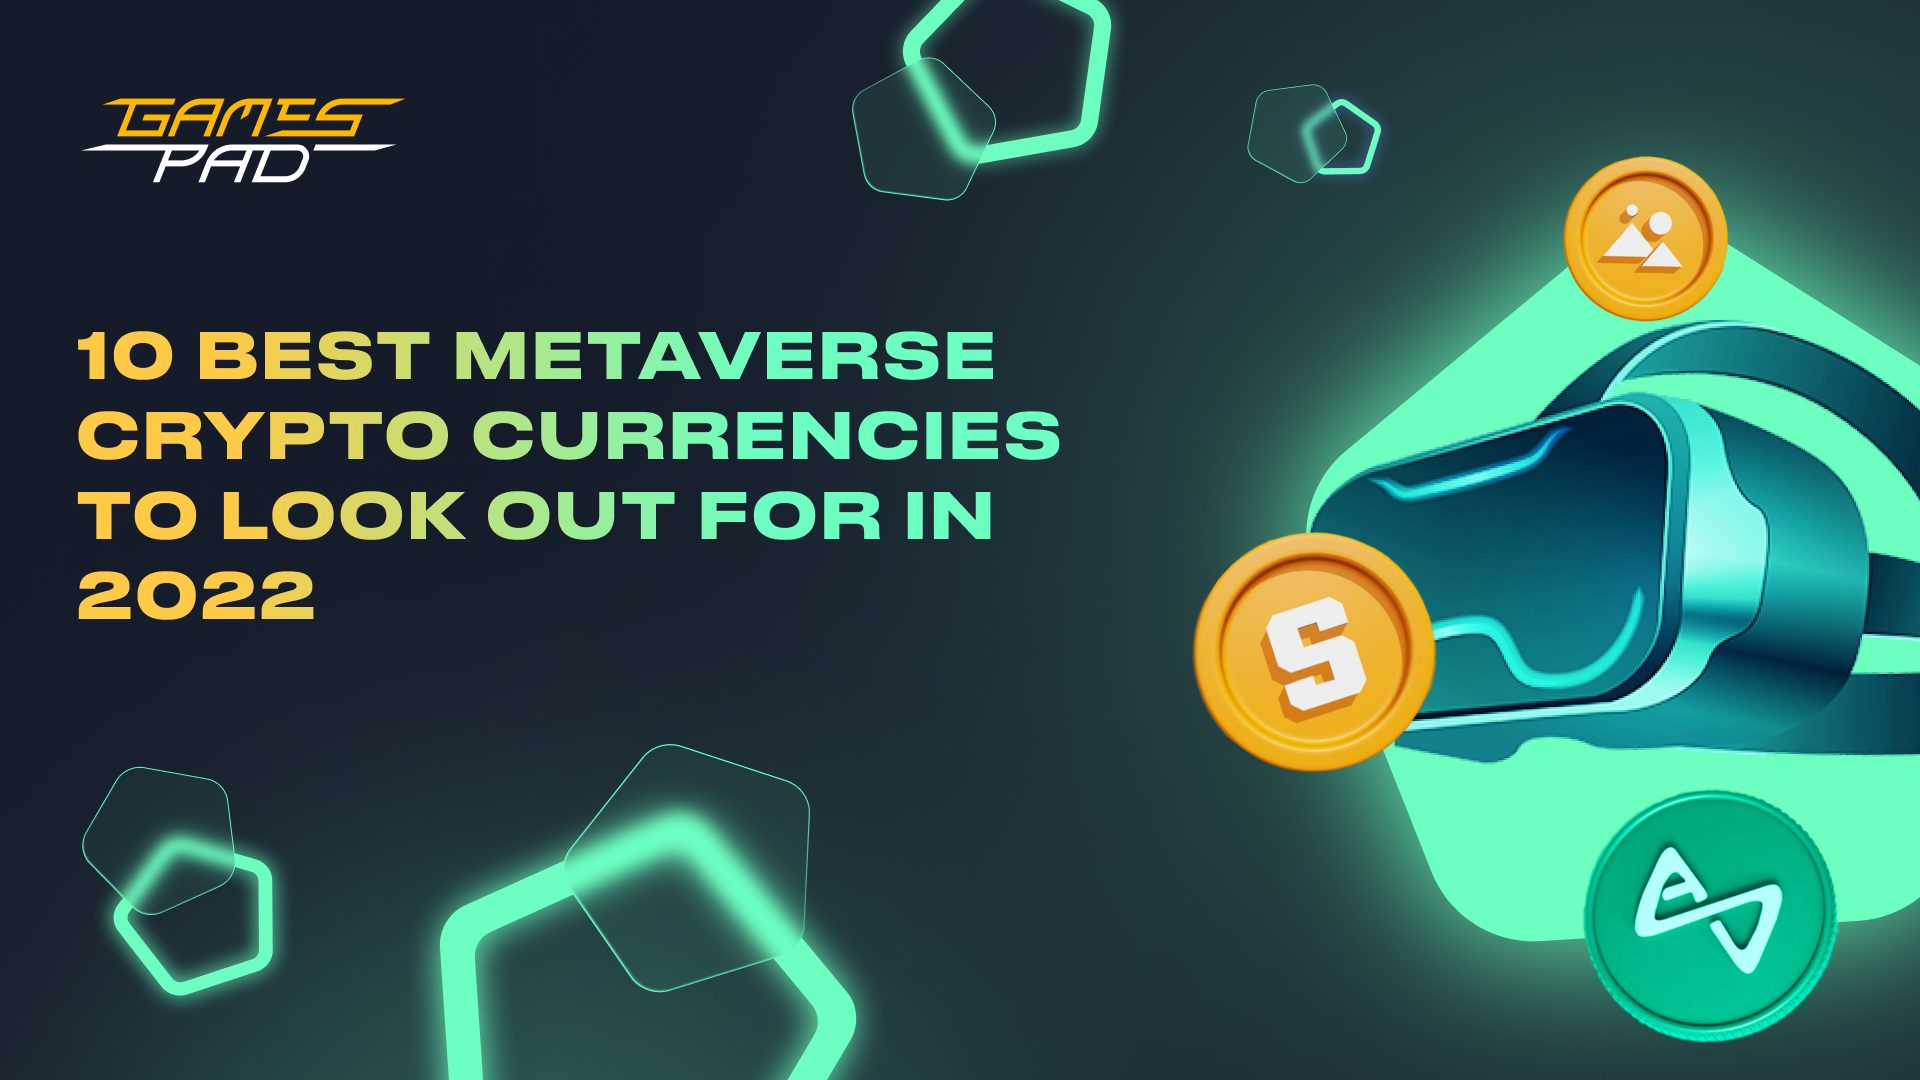 10 Best Metaverse Cryptocurrencies to Look Out For In 2022